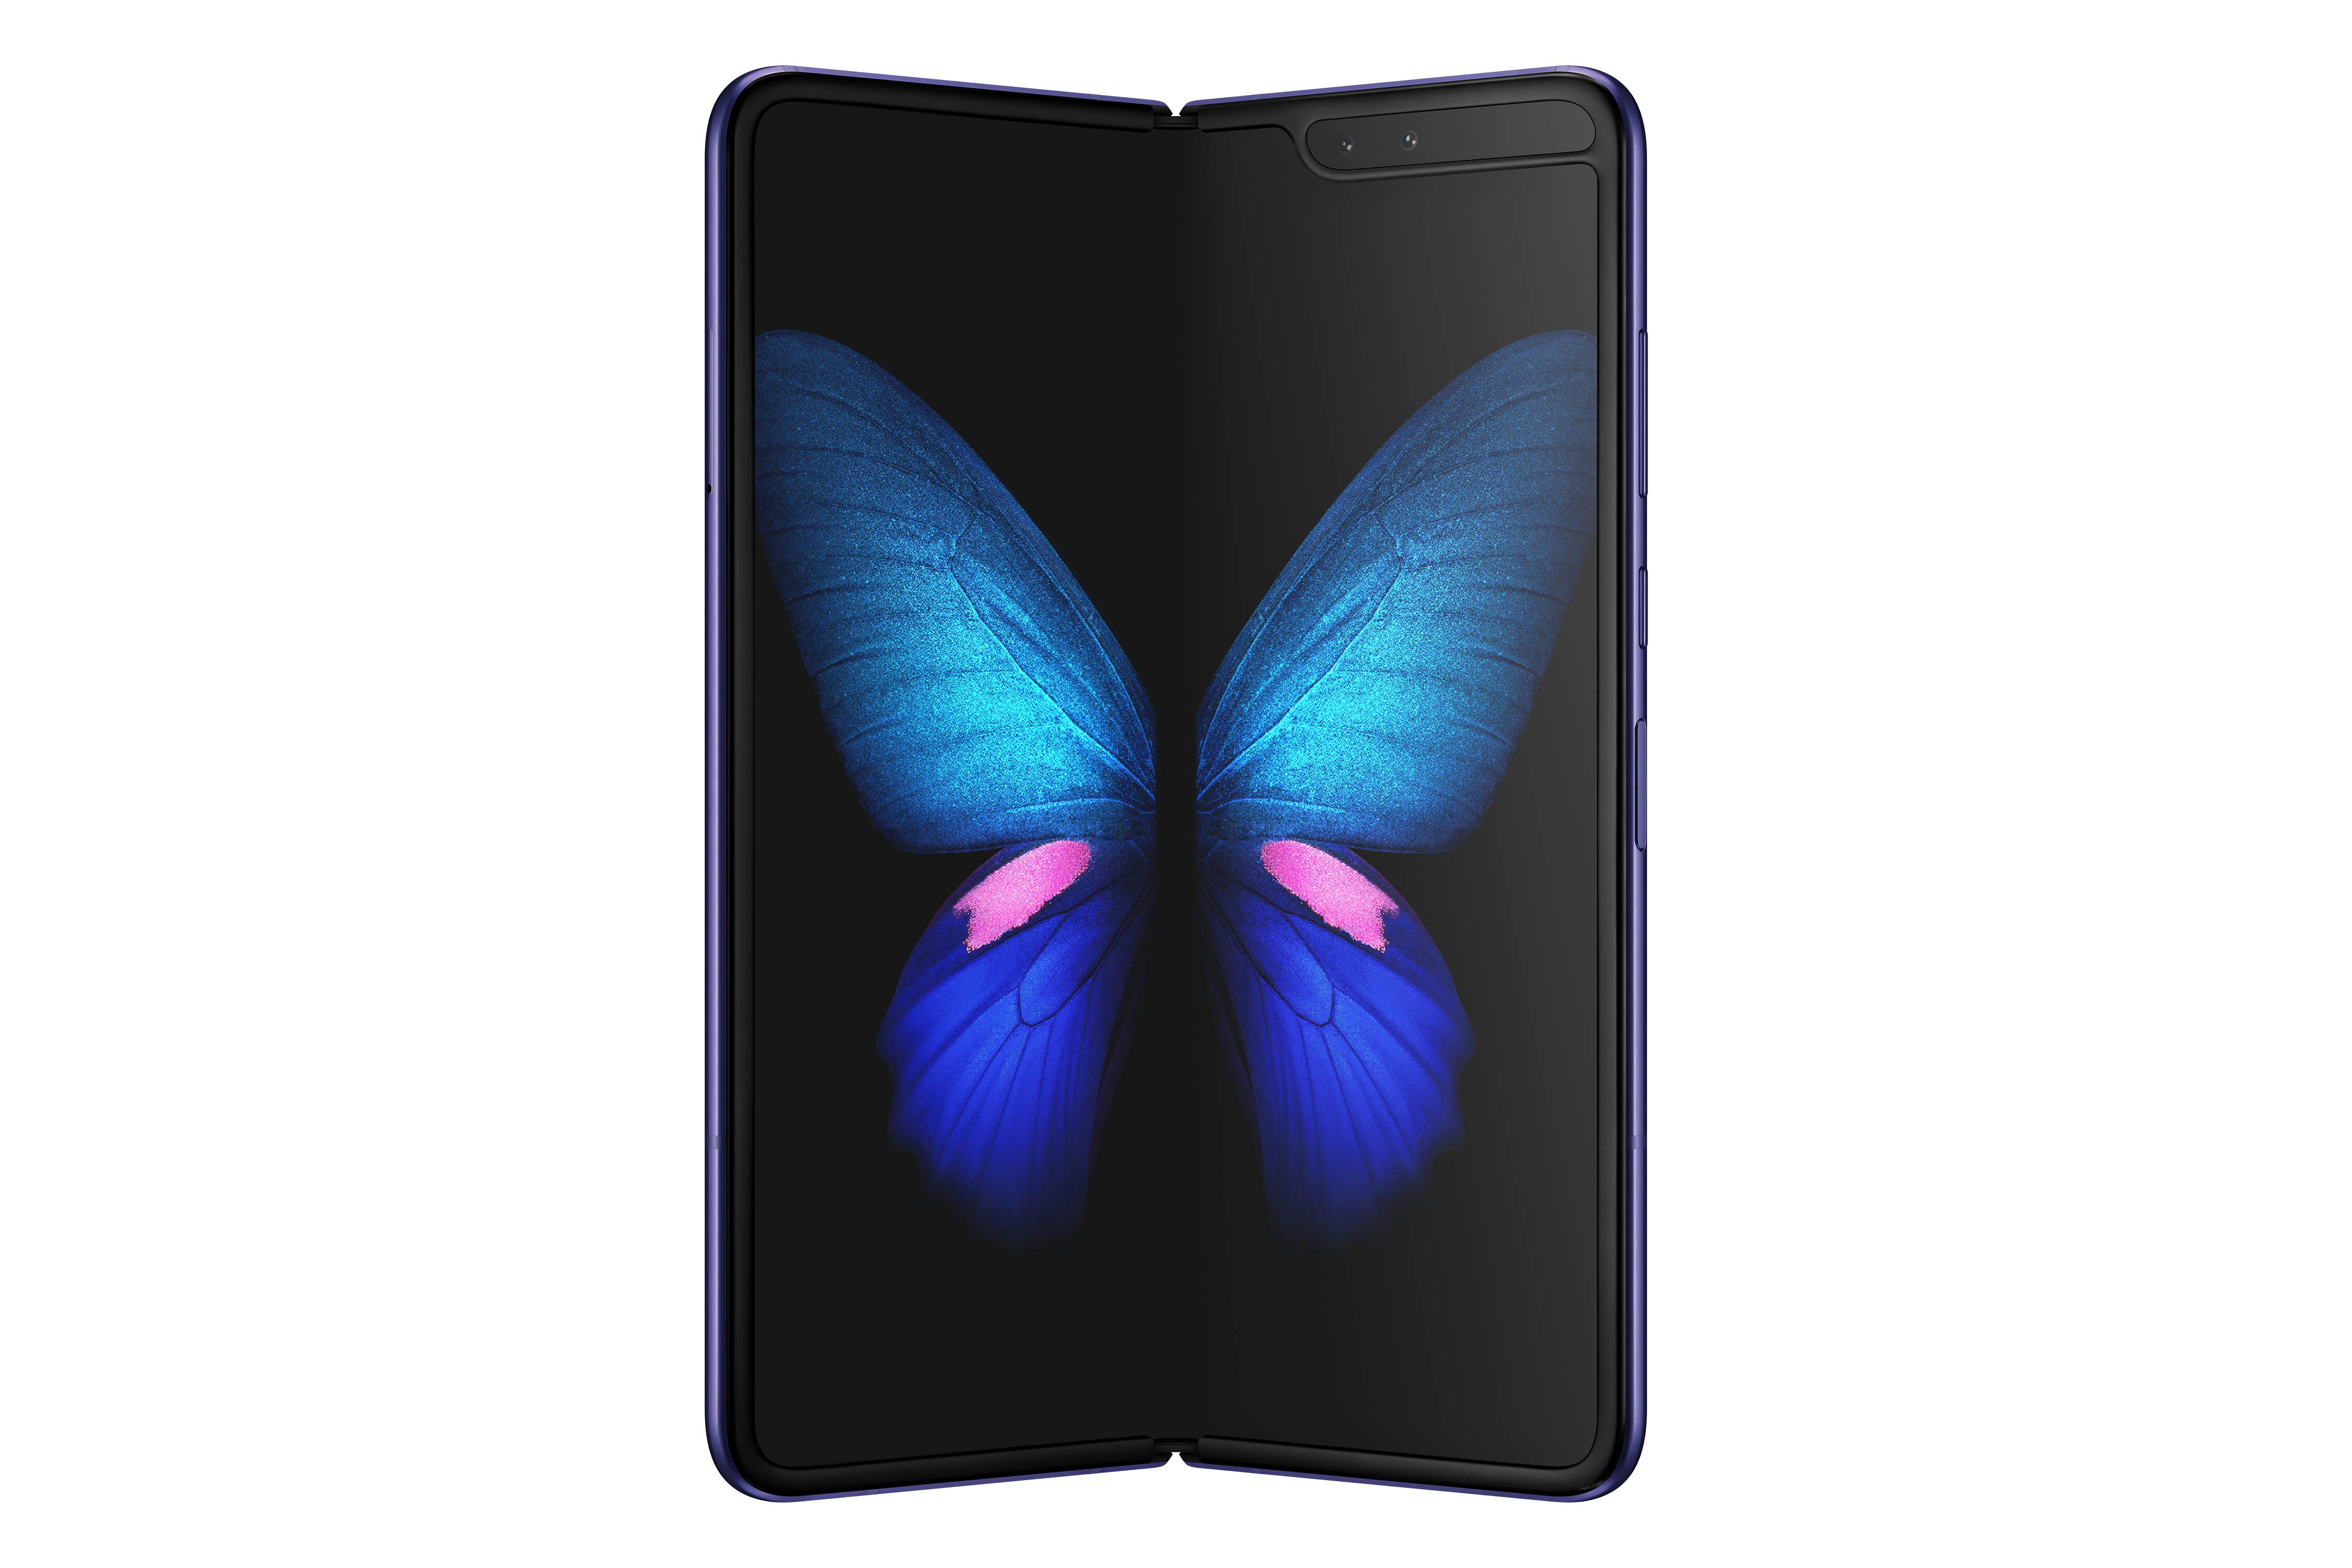 04_Galaxy_Fold_ProductImage_AstroBlue_GoldHinge_Front115